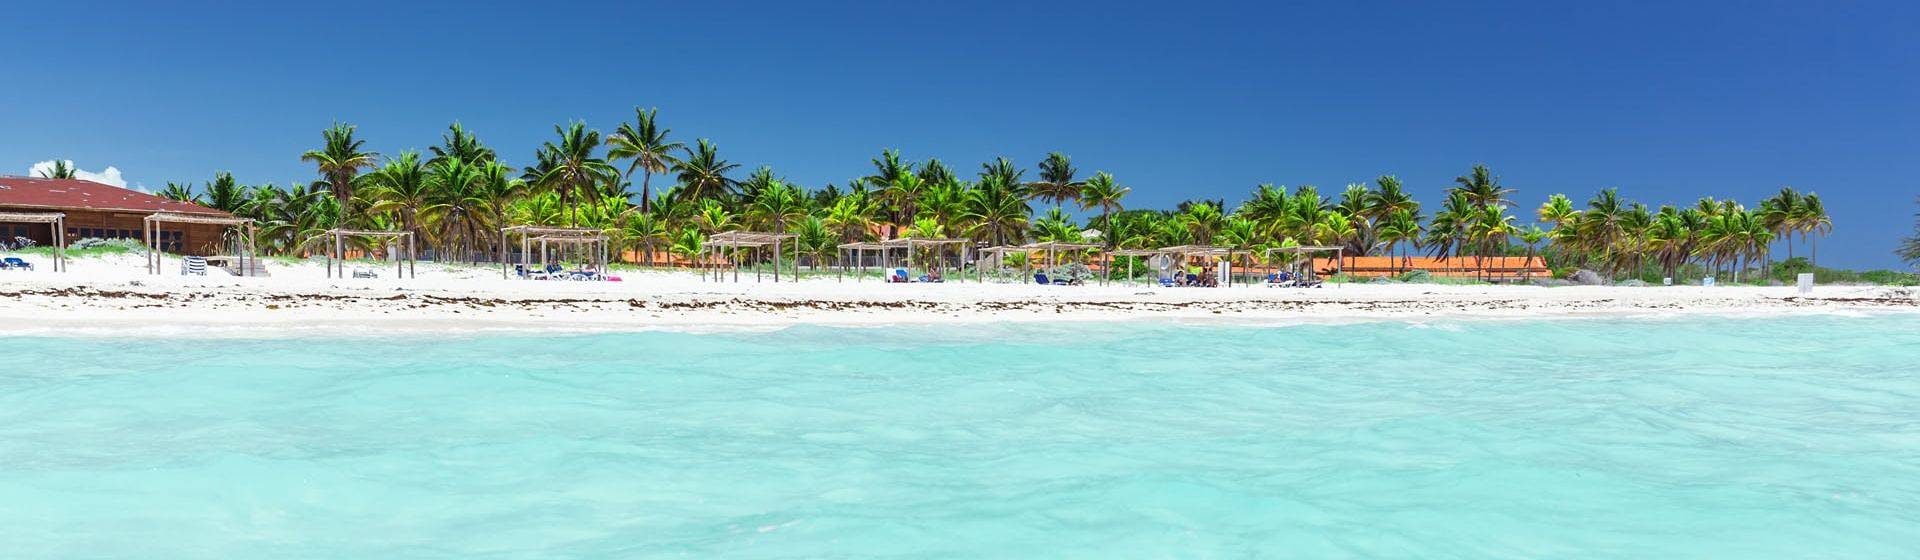 Holidays to Cayo Guillermo Image